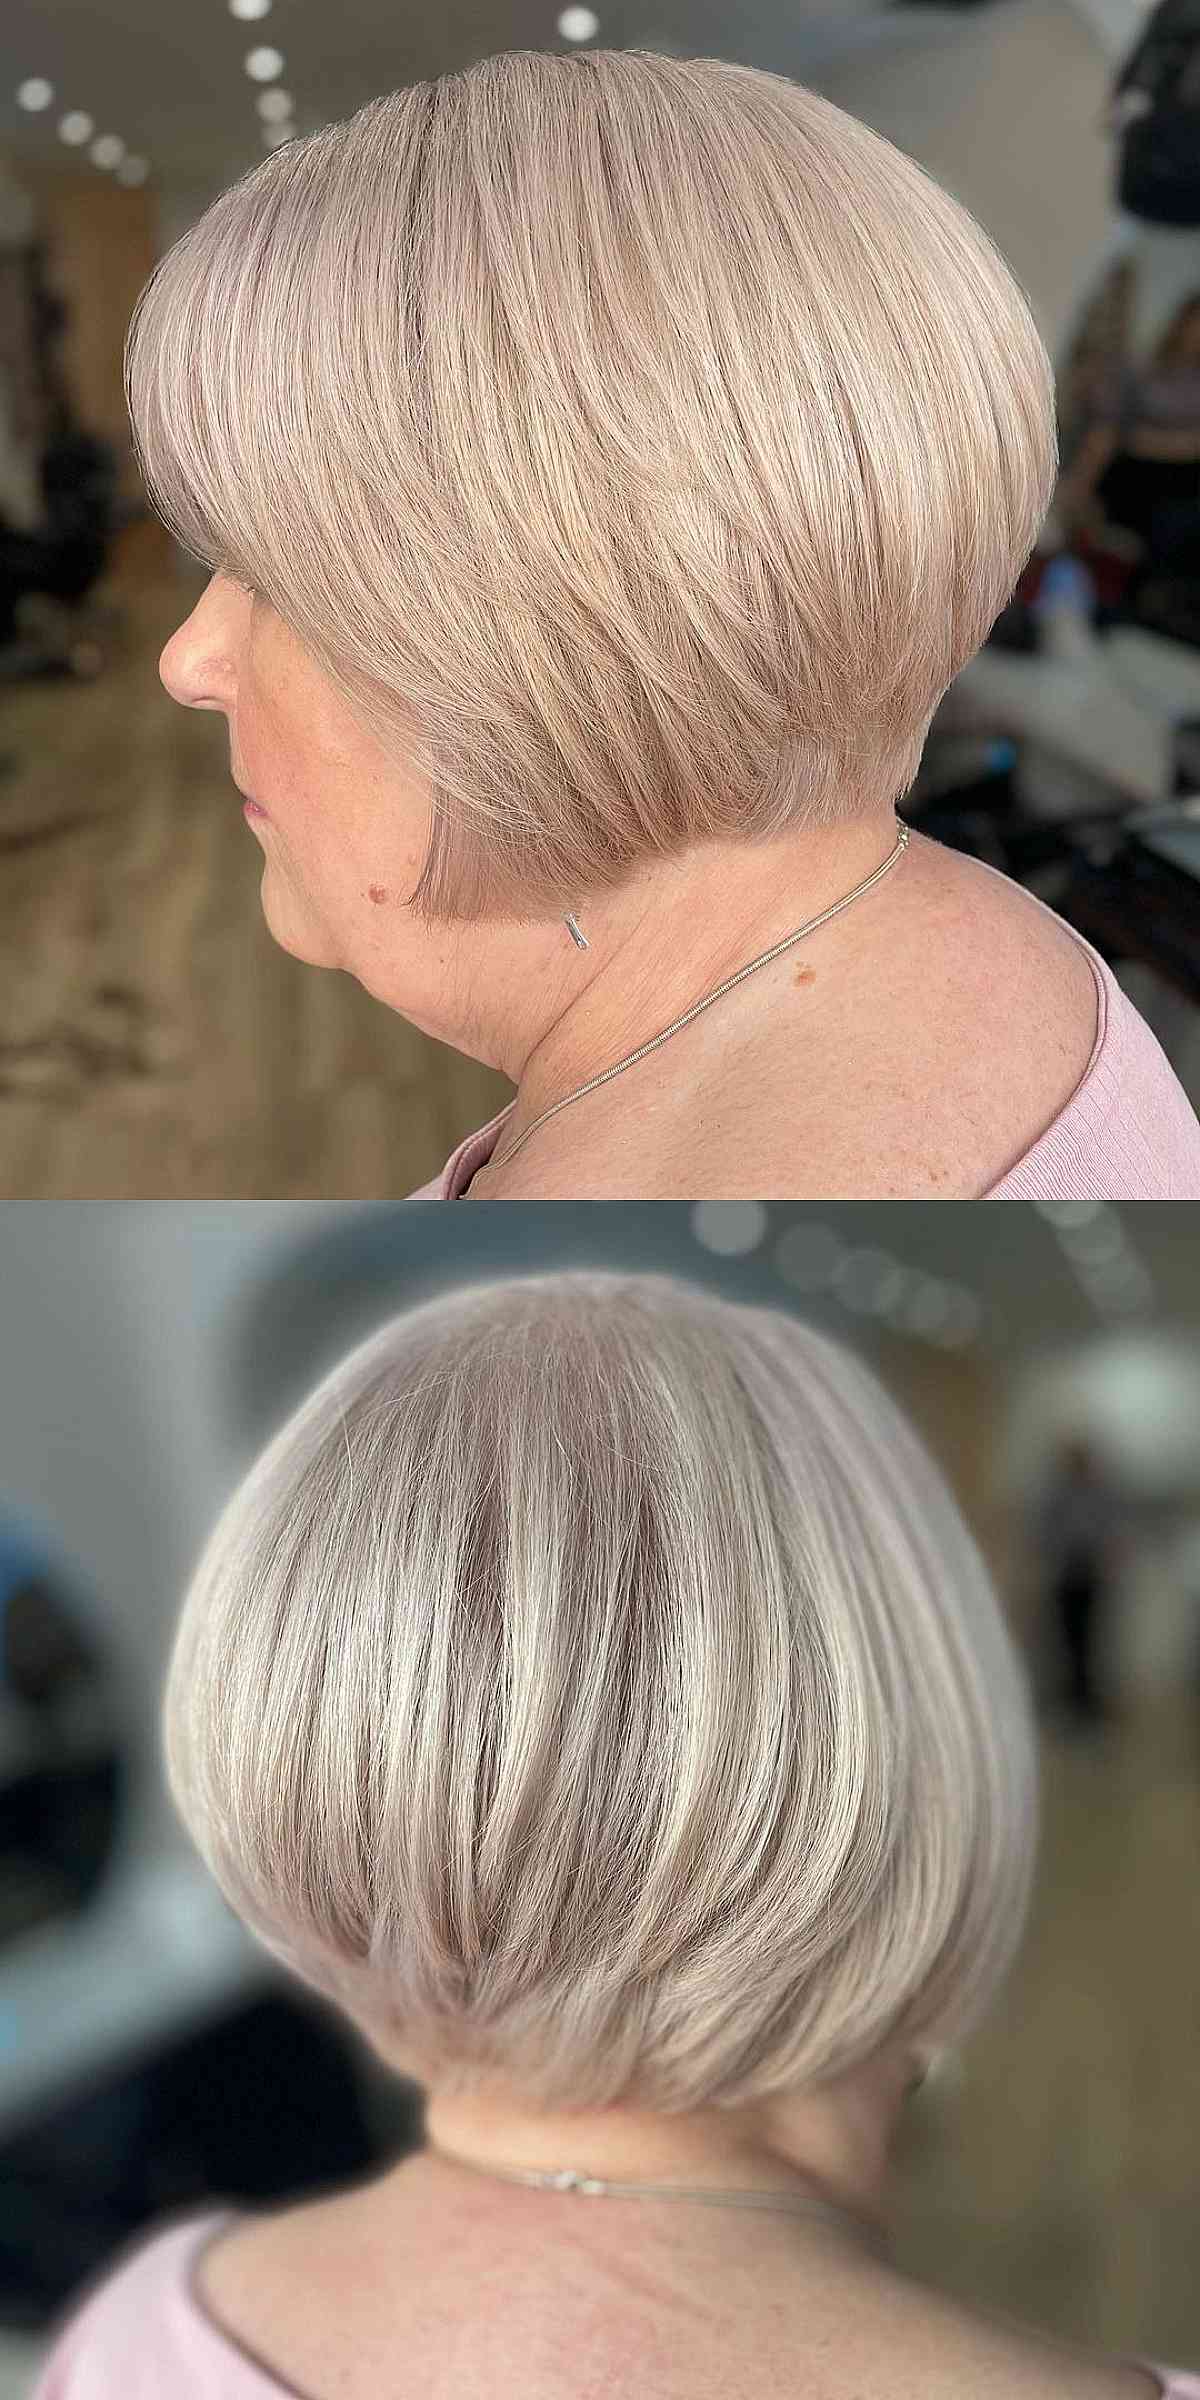 Graduated Bob with Short Layers for Older Women